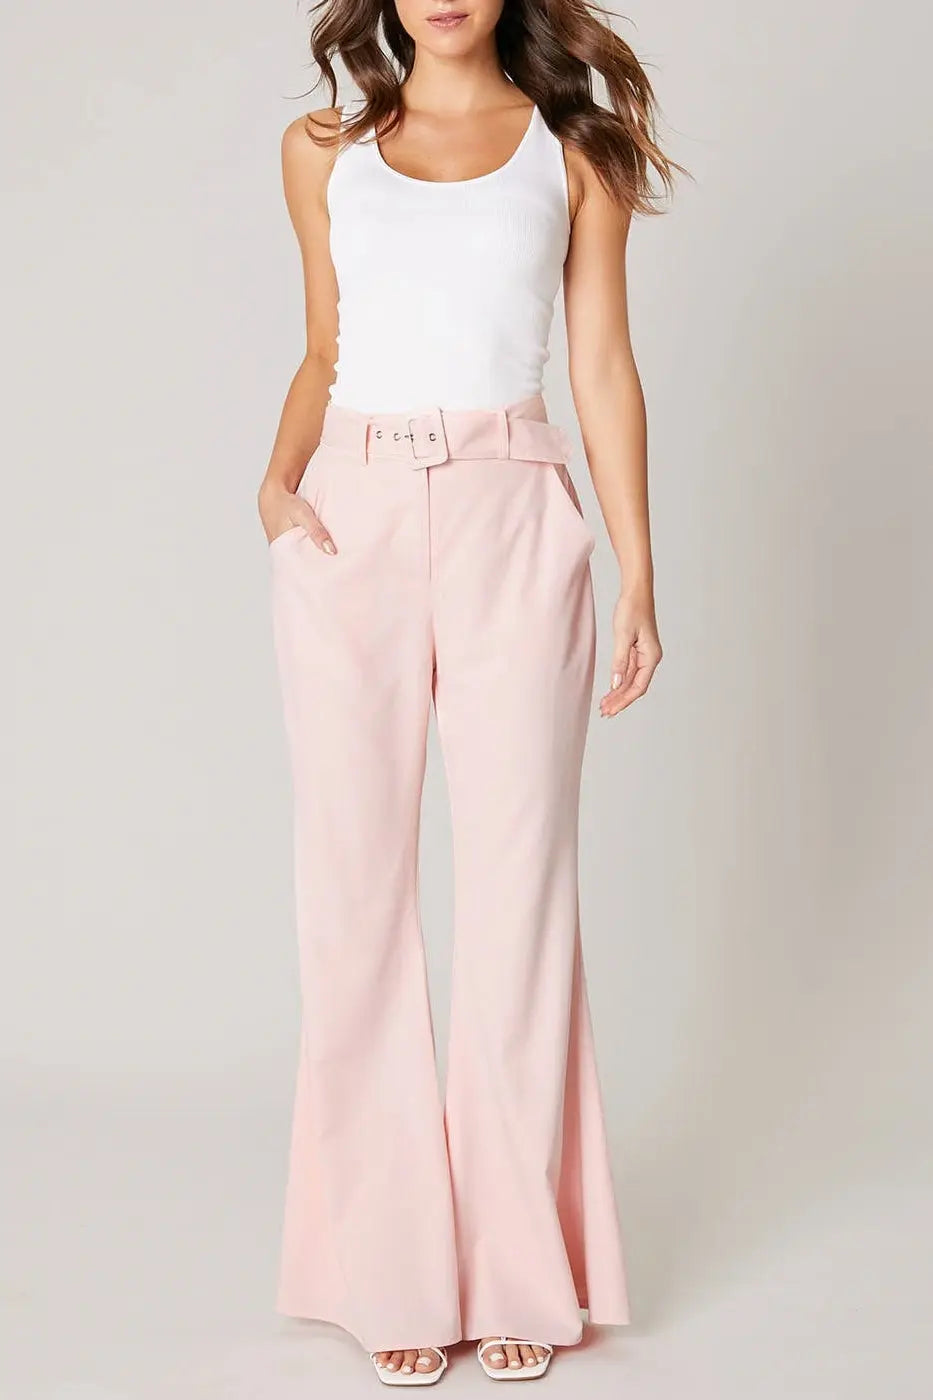 The Tiny Details Making Moves Bell Bottom Pants